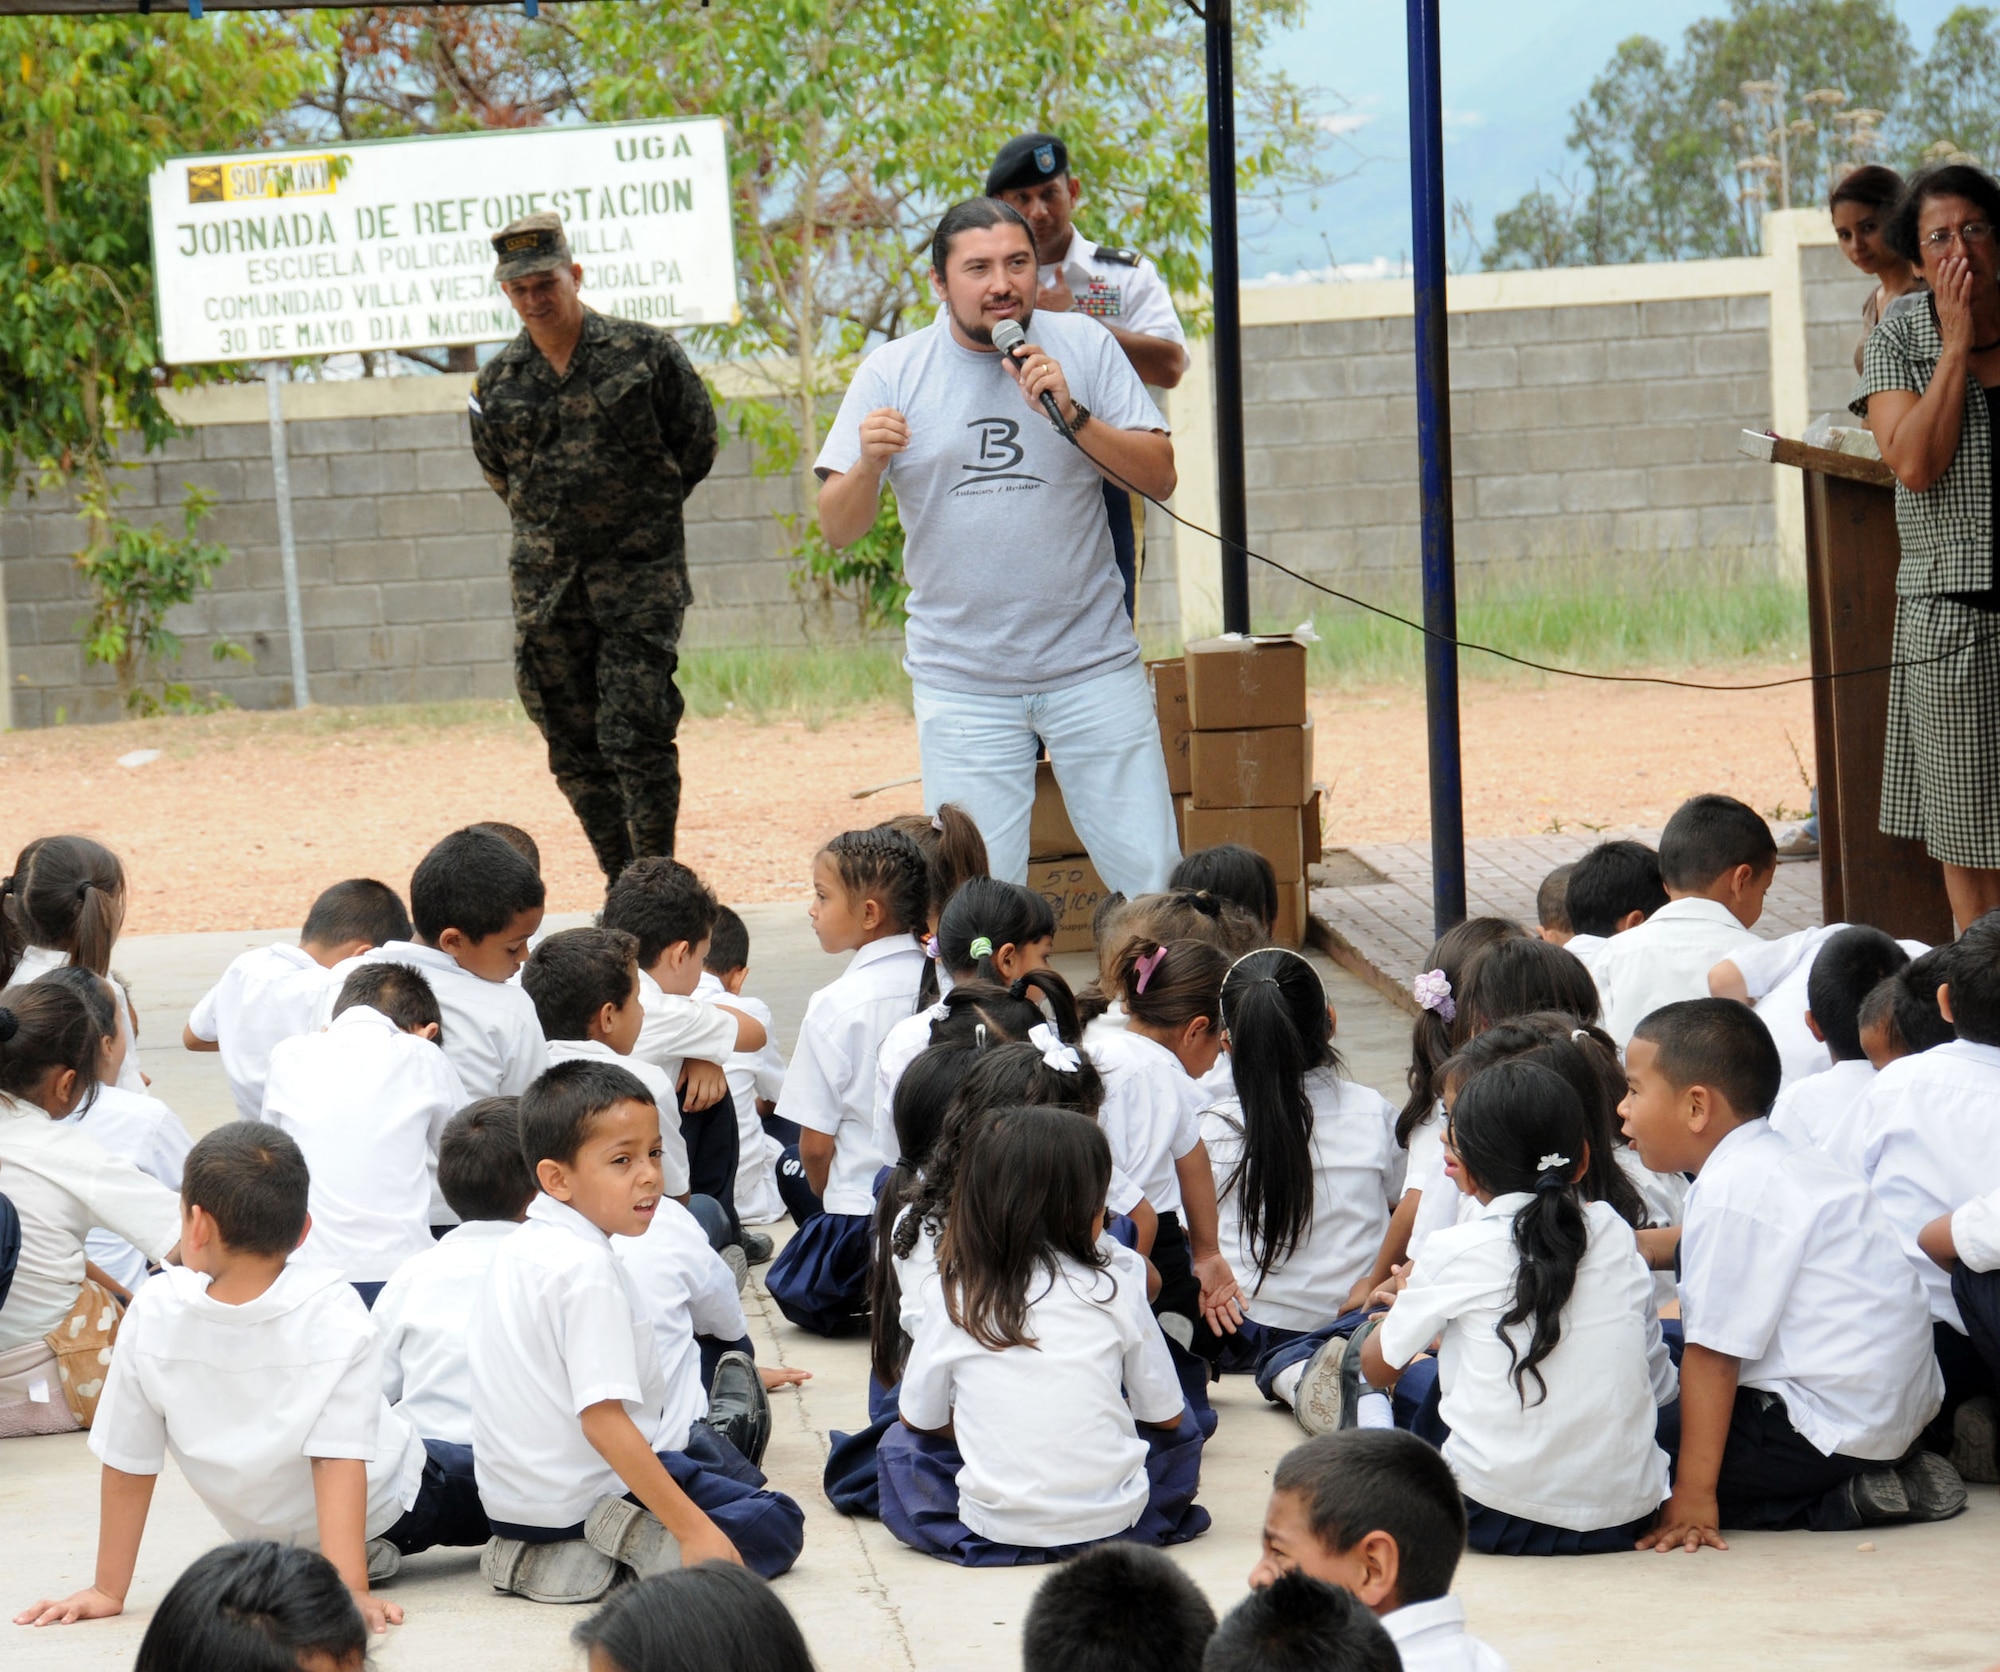 Trifilio Villela from Bride Ministries talks to children of the Policarpo Bonilla school about the improtance of proper hygiene.  Joint Task Force-Bravo, non-government organizations Clean the World, Bridge Ministries and Kick for Nick Foundation, the Honduran 21st Military Police Battalion and the Honduran National Police formed a partnership to distribute soap kits, backpacks with school supplies, tooth brushes and tooth paste, soccer balls and uniforms to students at eight Tegucigalpa, Honduras schools in a two-day event, May 20-21, 2014.  The group handed out over 4,200 soap kits, 600 backpacks, 150 tooth brushes and tooth paste, and 50 soccer balls.  (Photo by U. S. Air National Guard Capt. Steven Stubbs)